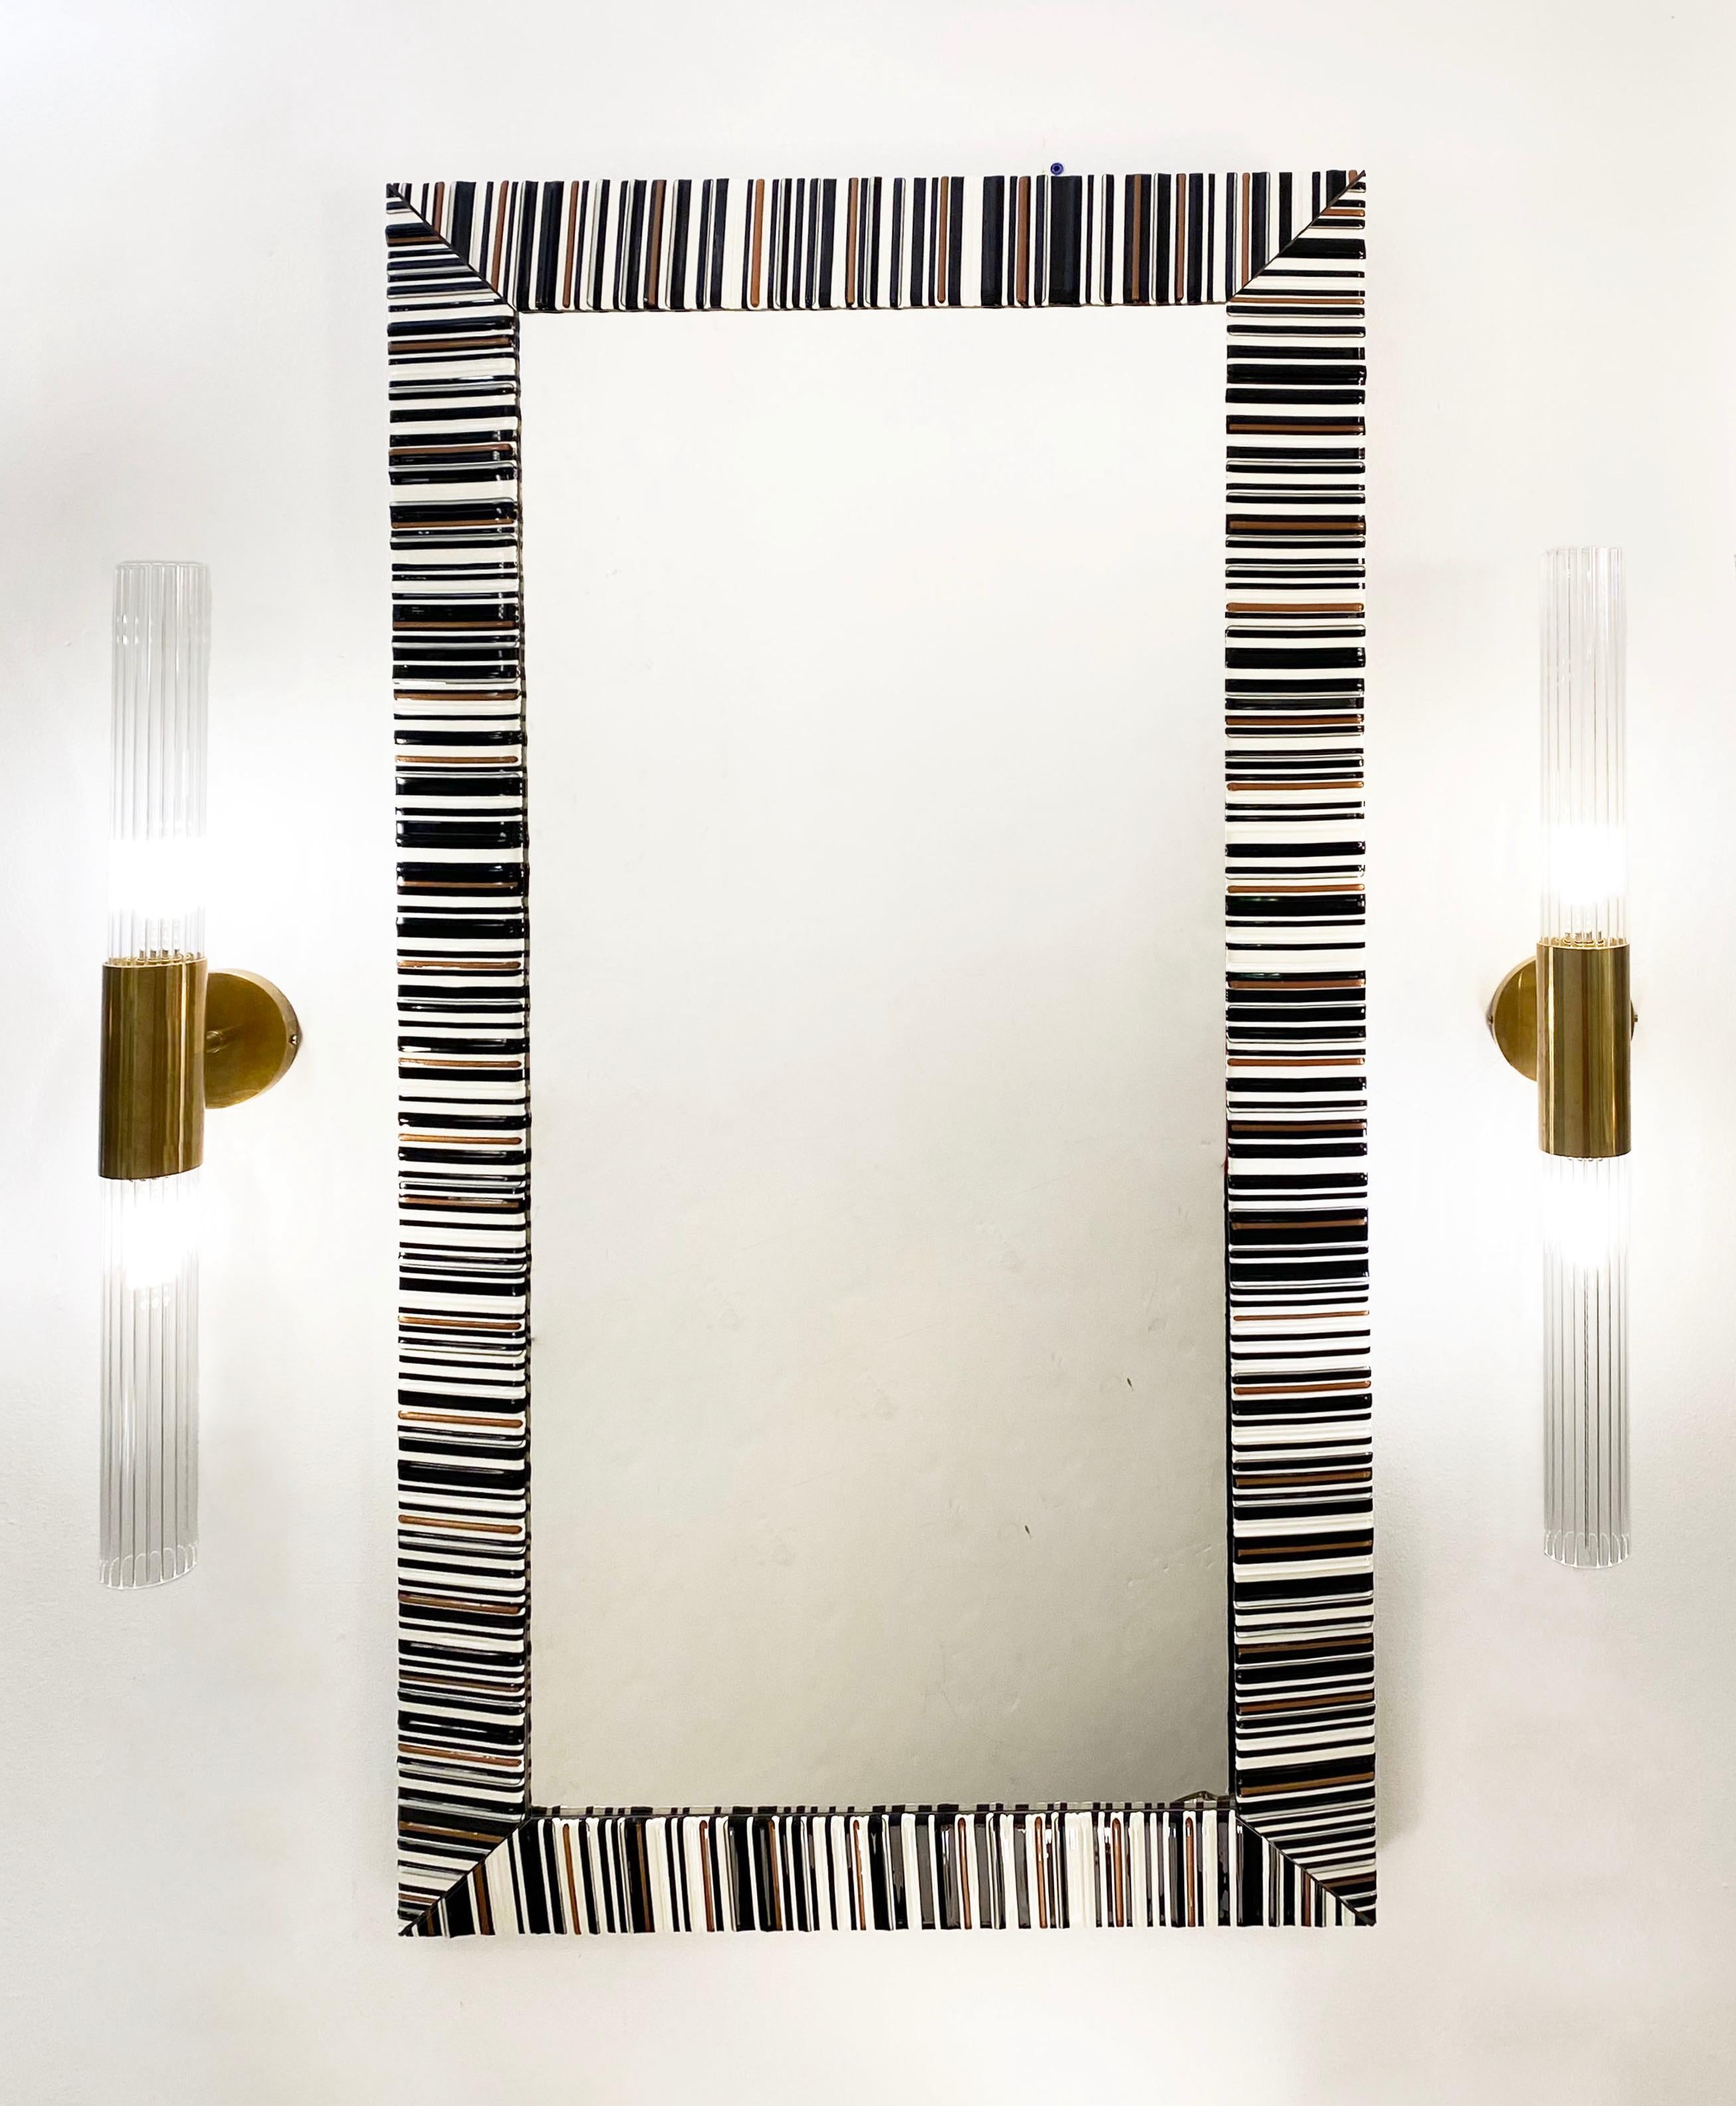 A contemporary Murano glass creation, this wall mirror is entirely handcrafted with the fusion technique in 3 glass colors: black, white, and aventurine (a difficult technique where real copper metal is mixed in the glass). Each bar is individually